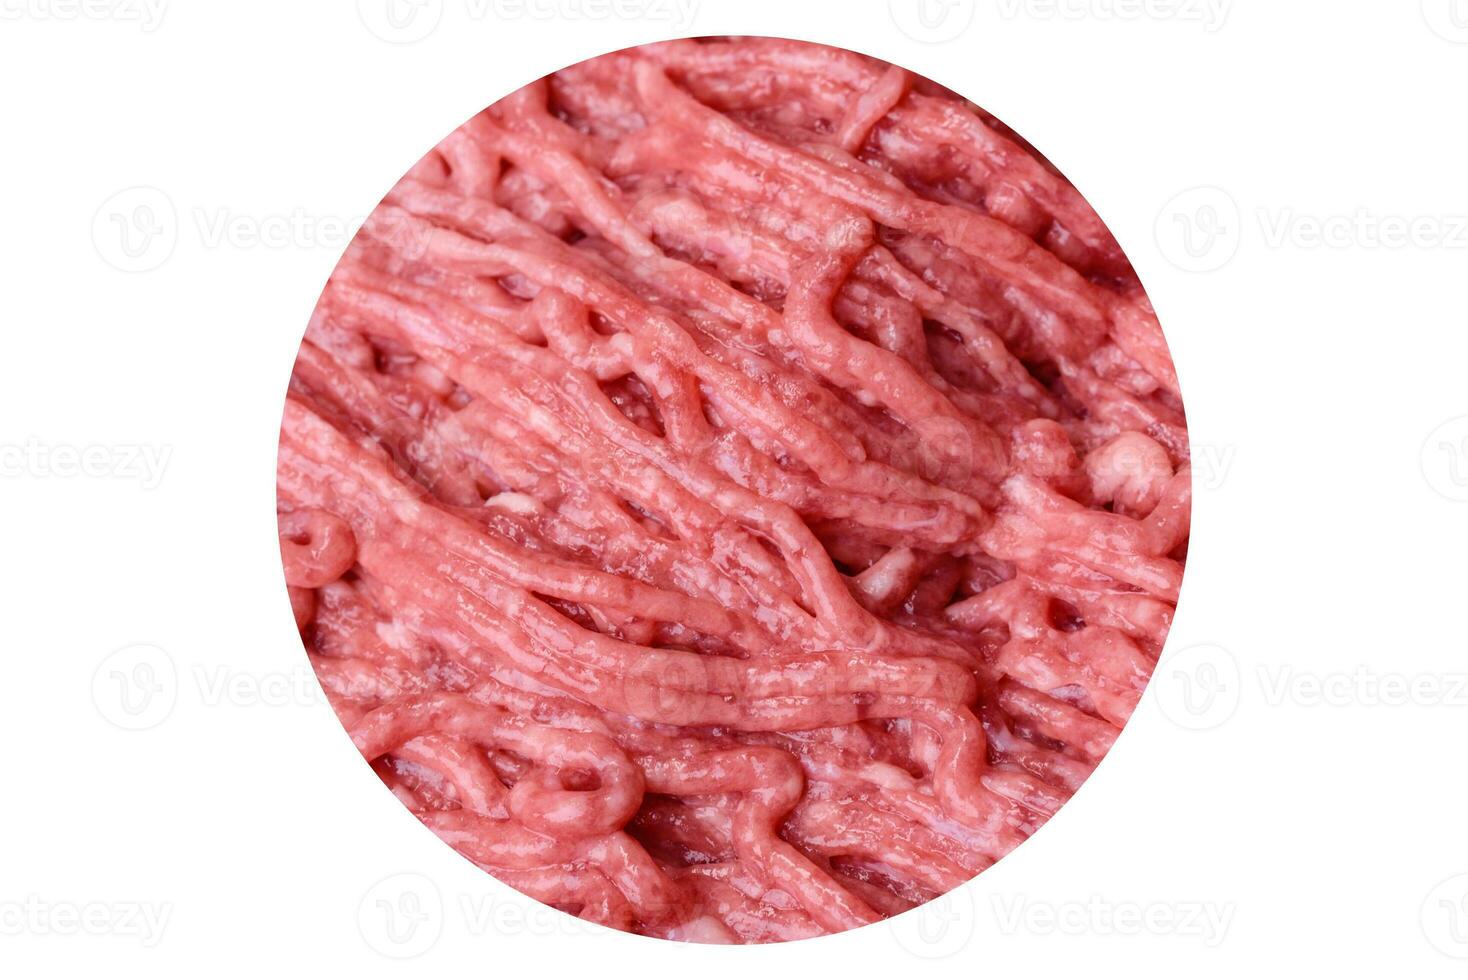 Fresh minced beef on cutting board on dark background with ingredients for cooking photo